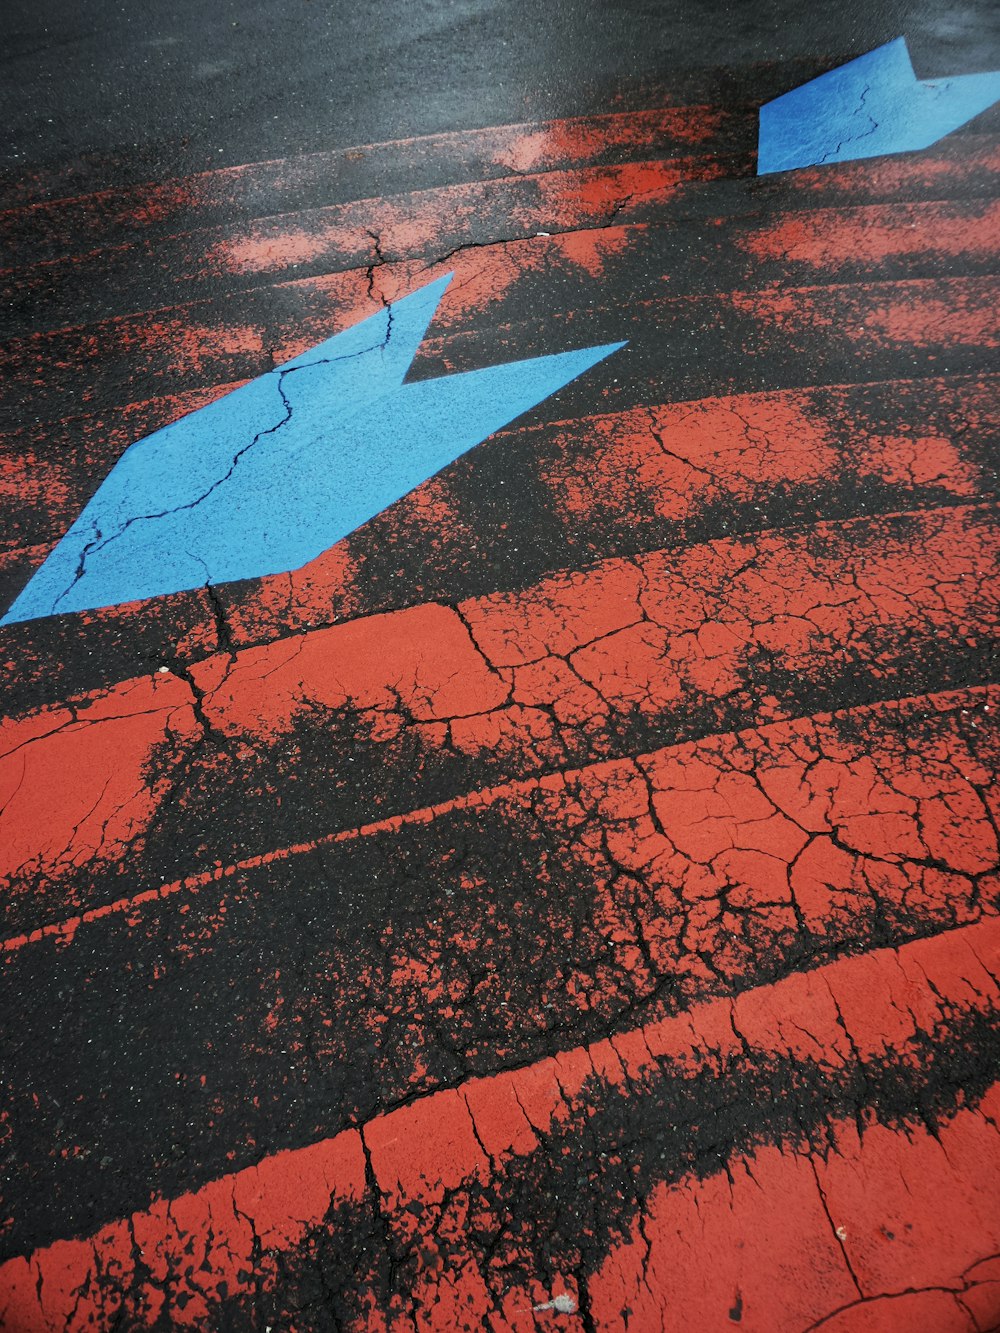 a blue arrow on a red surface